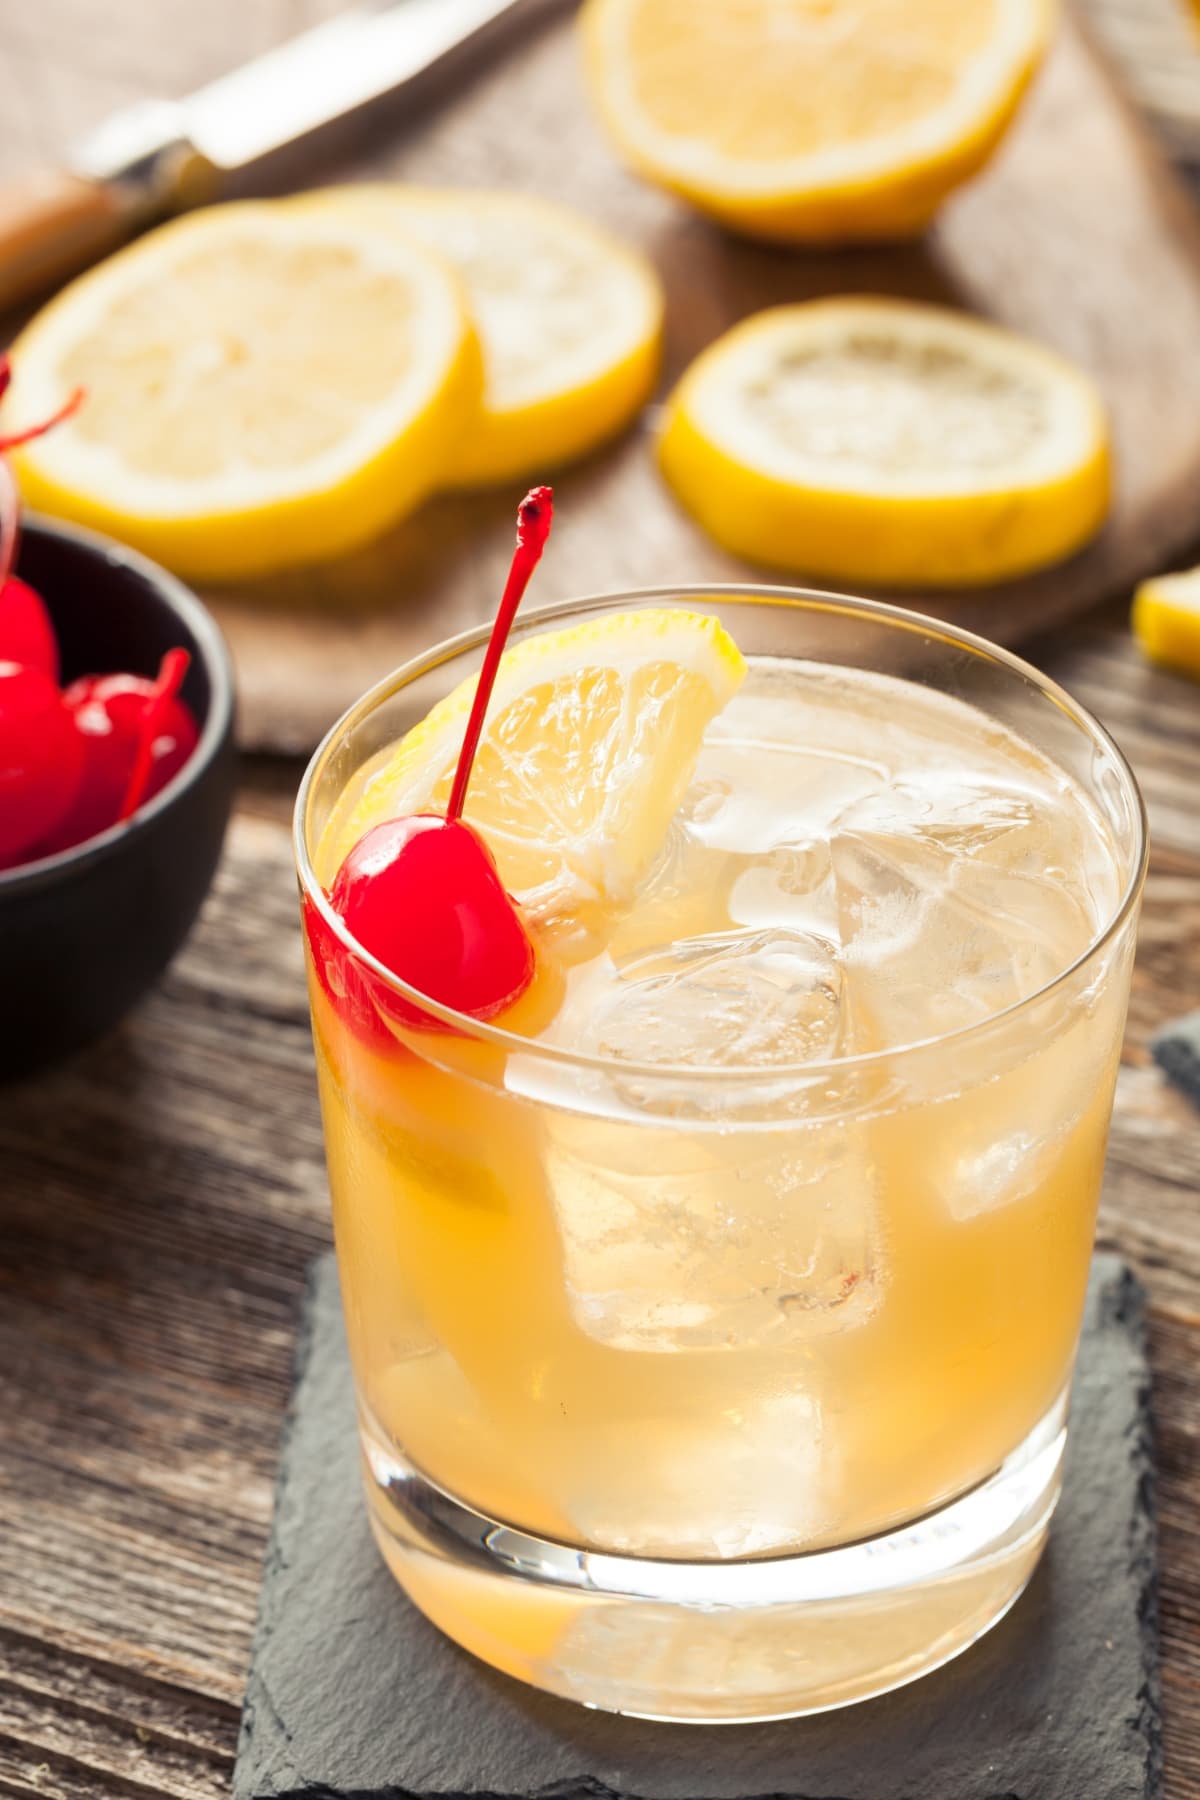 A glass of whiskey sour cocktail on a glass garnished with orange slice and cherry.